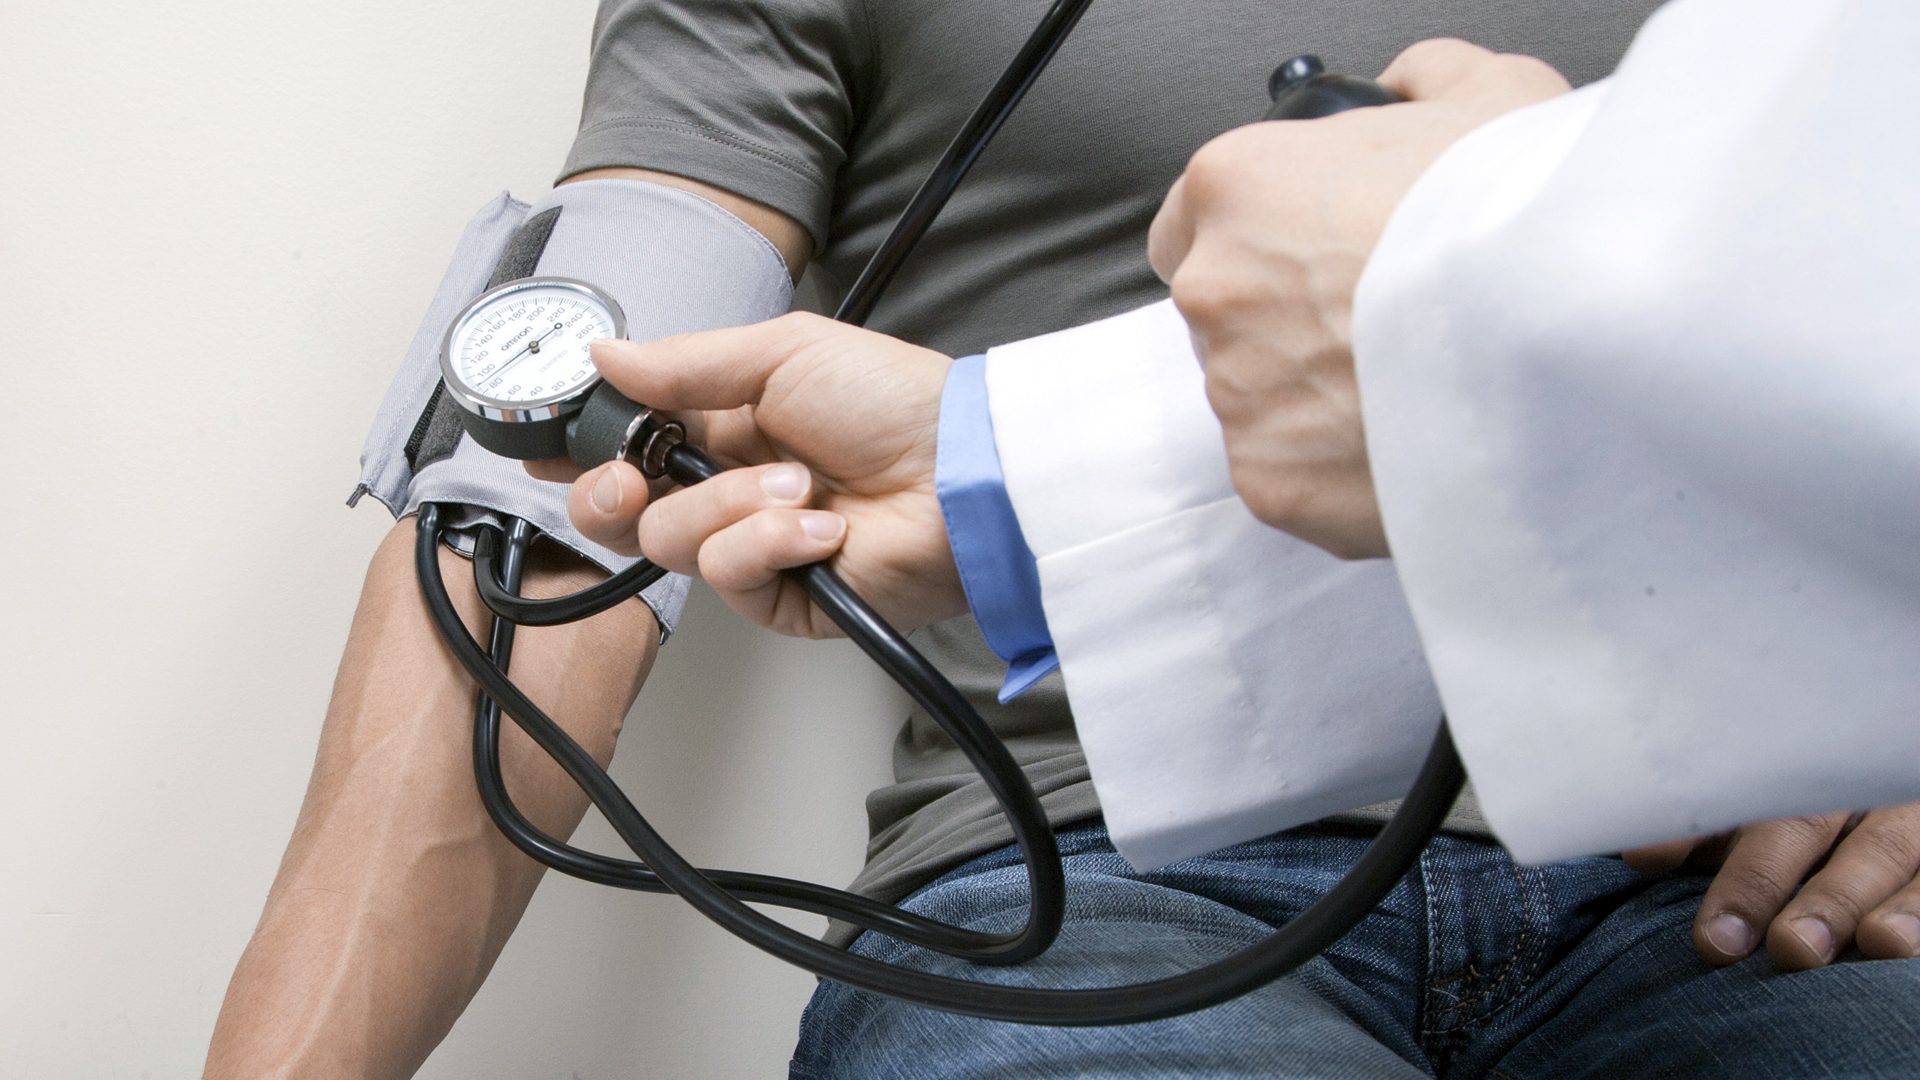 Why is Maintaining a Healthy Blood Pressure Important?